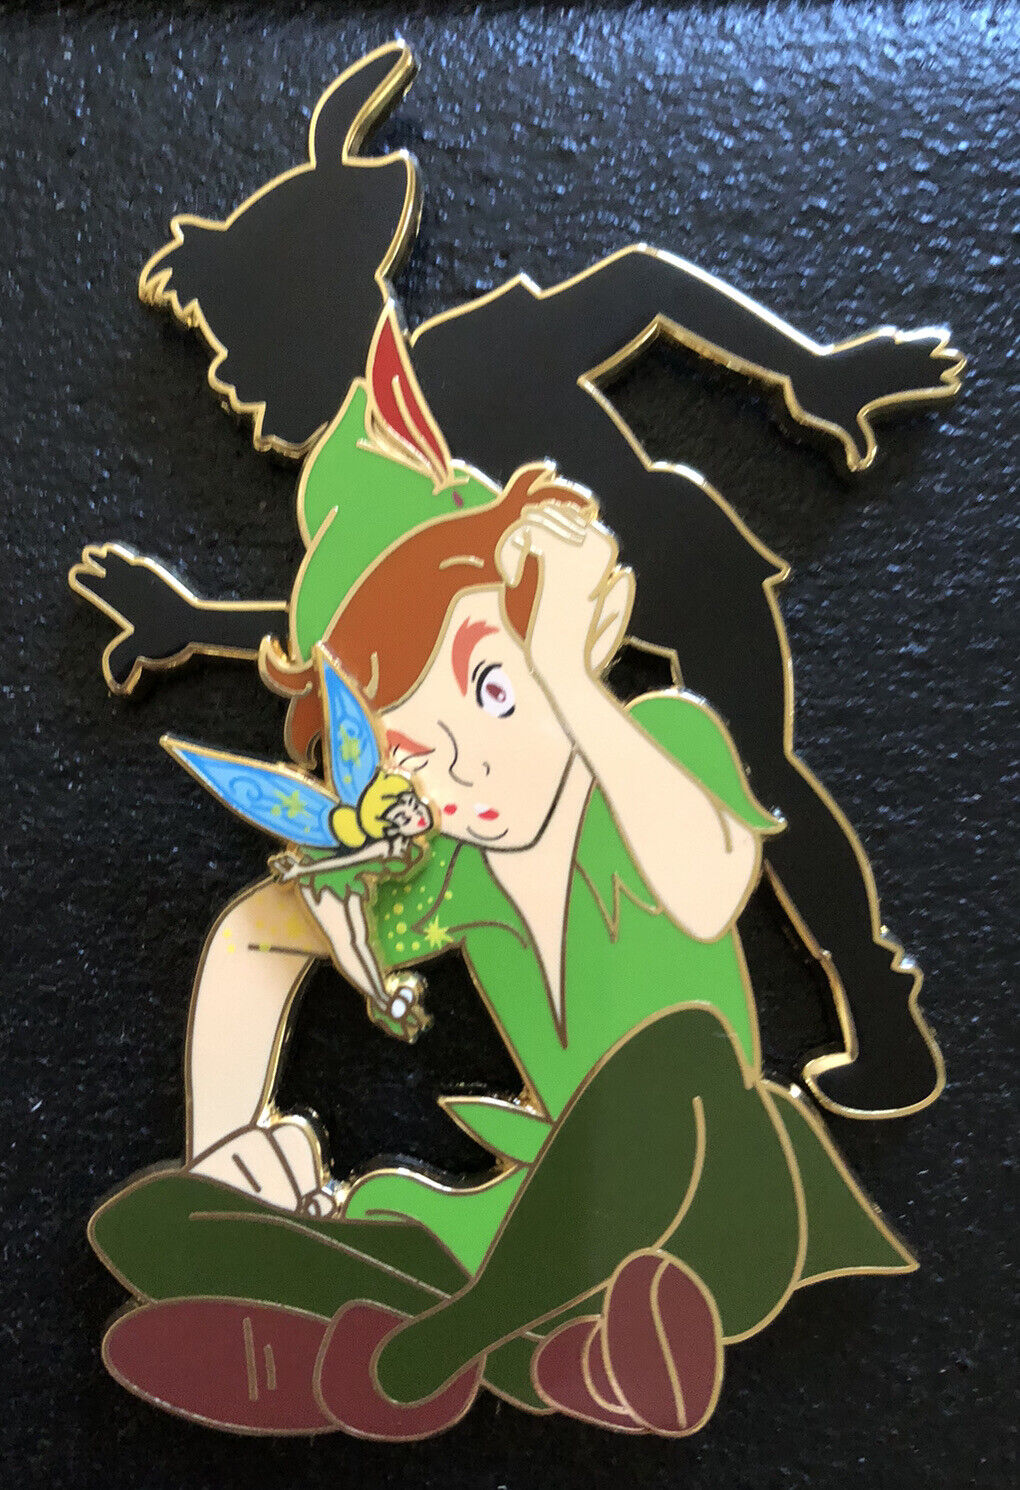 Peter Pan & his Shadow with Tinker Bell Jumbo Fantasy Pin by BunnyxYoyo - LE 50